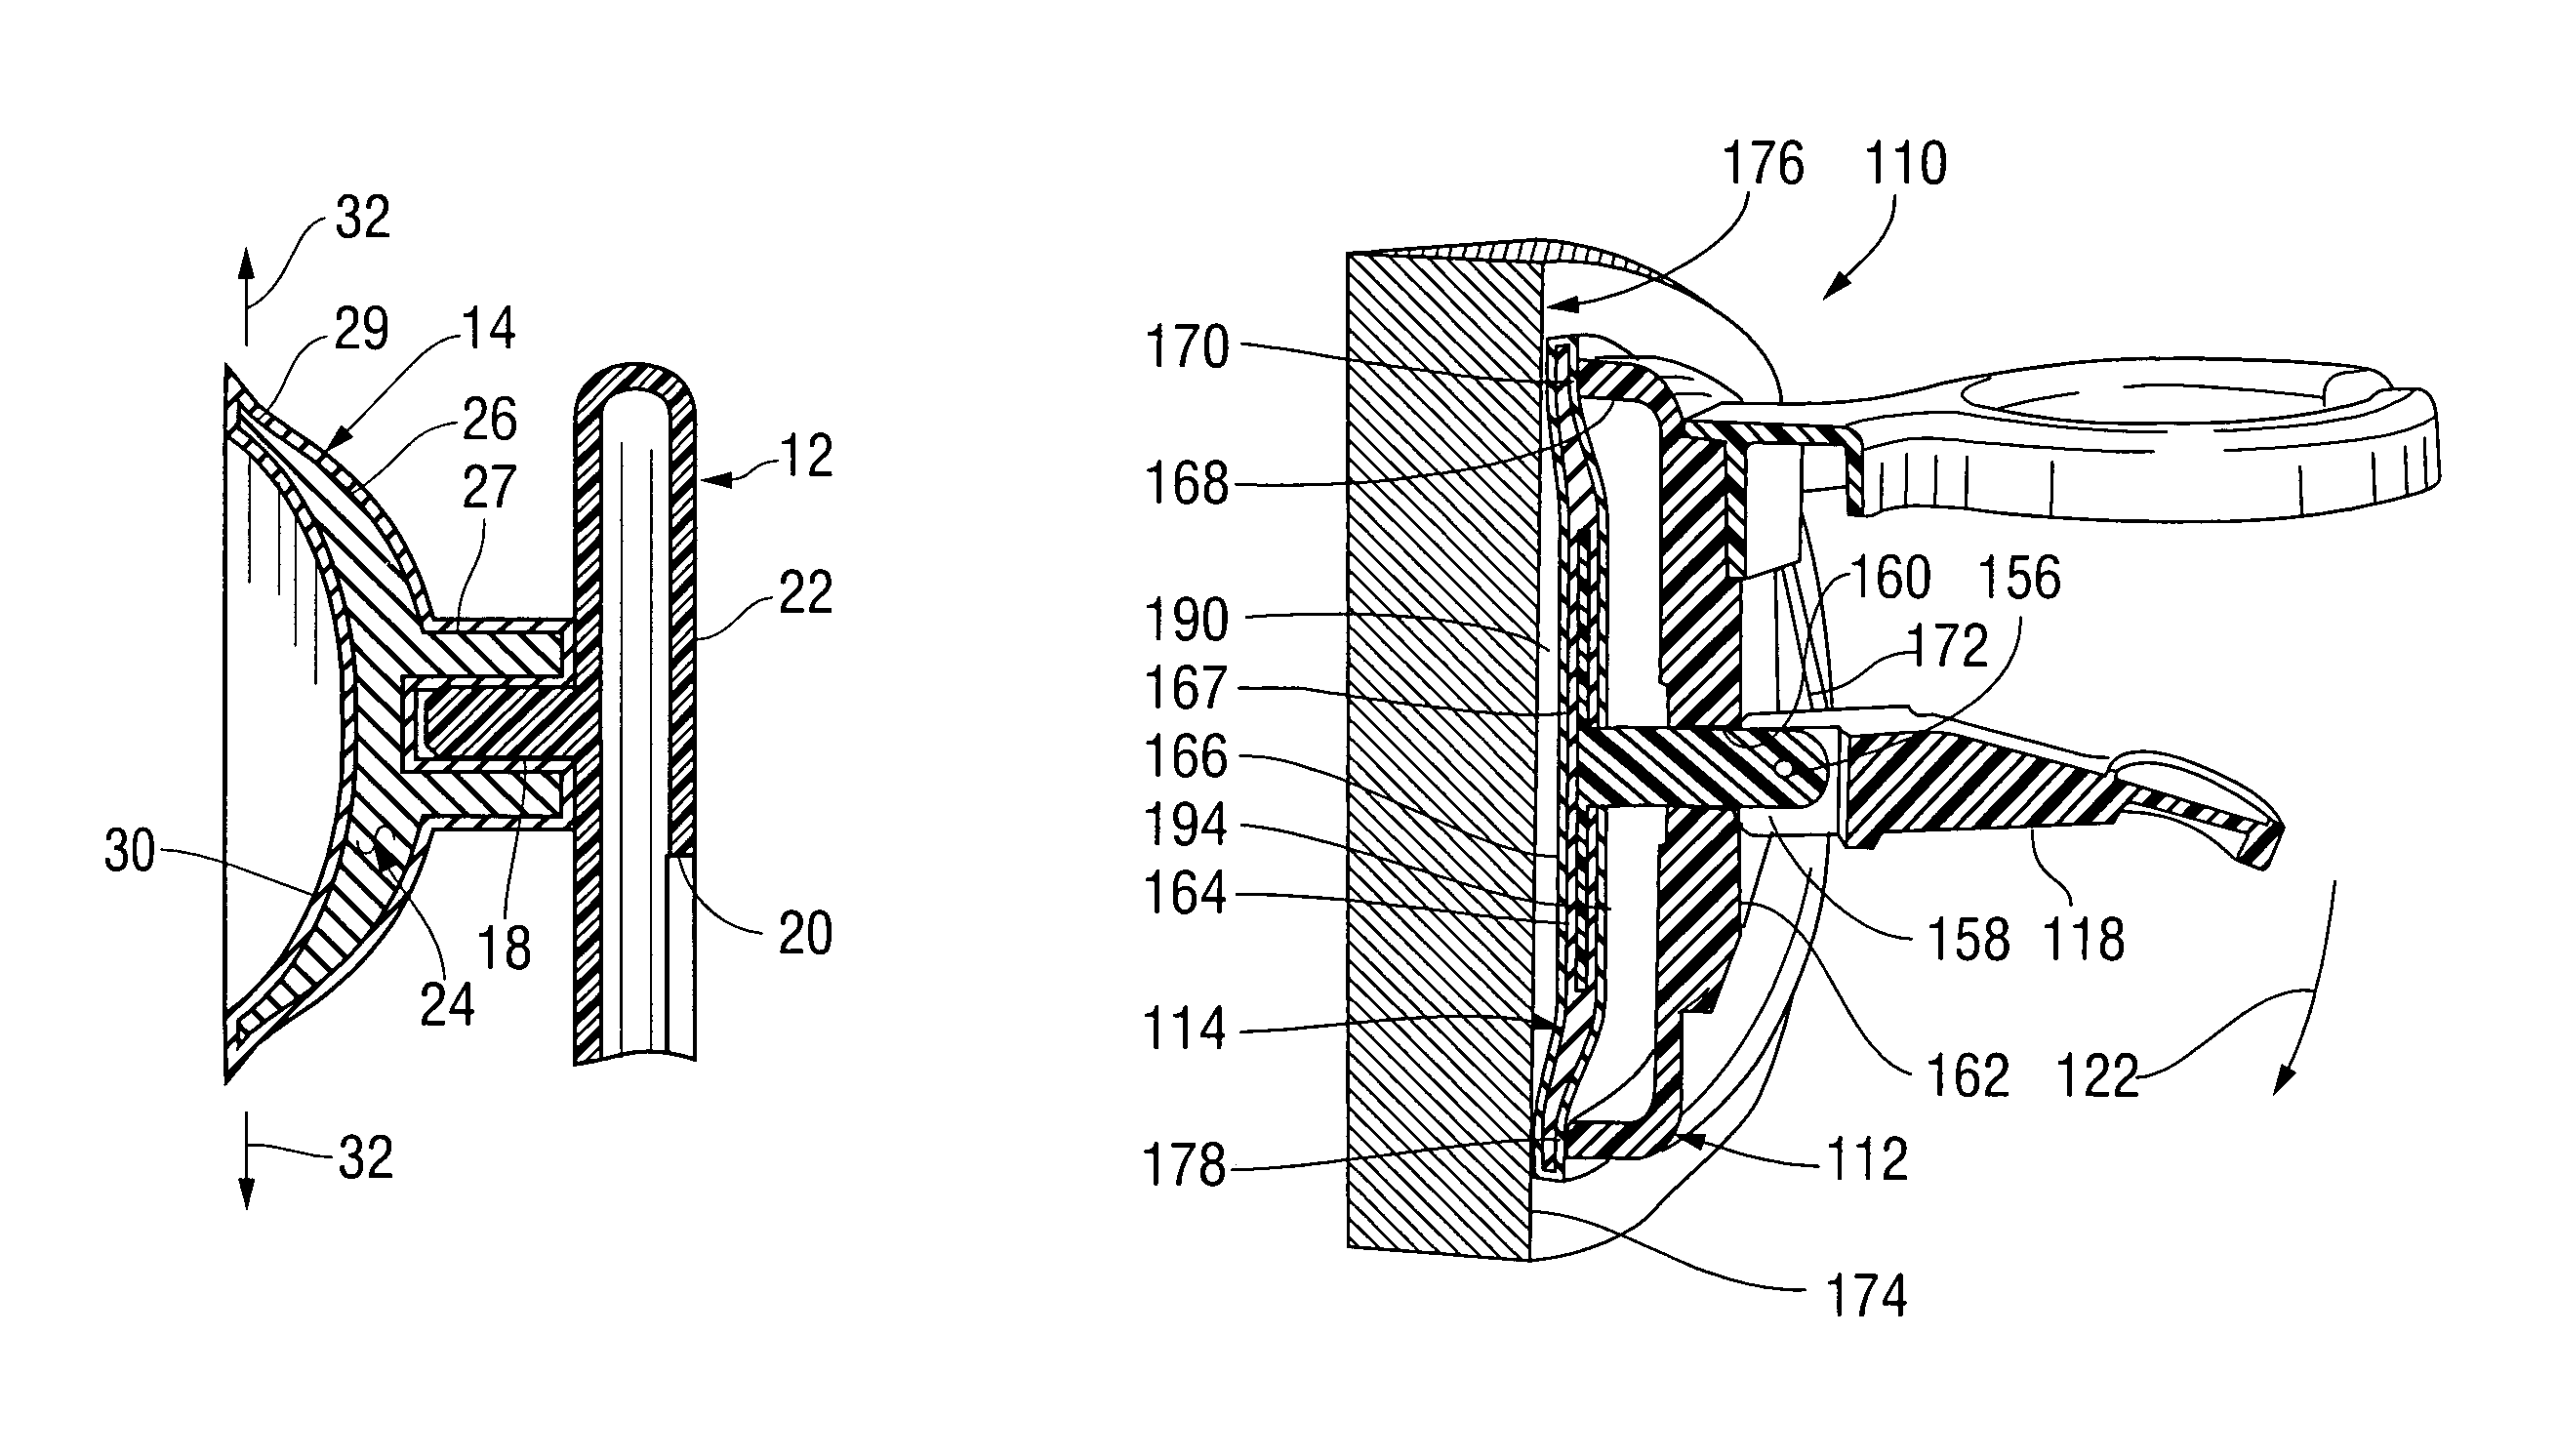 Suction cup apparatus for attachment to porous and nonporous surfaces